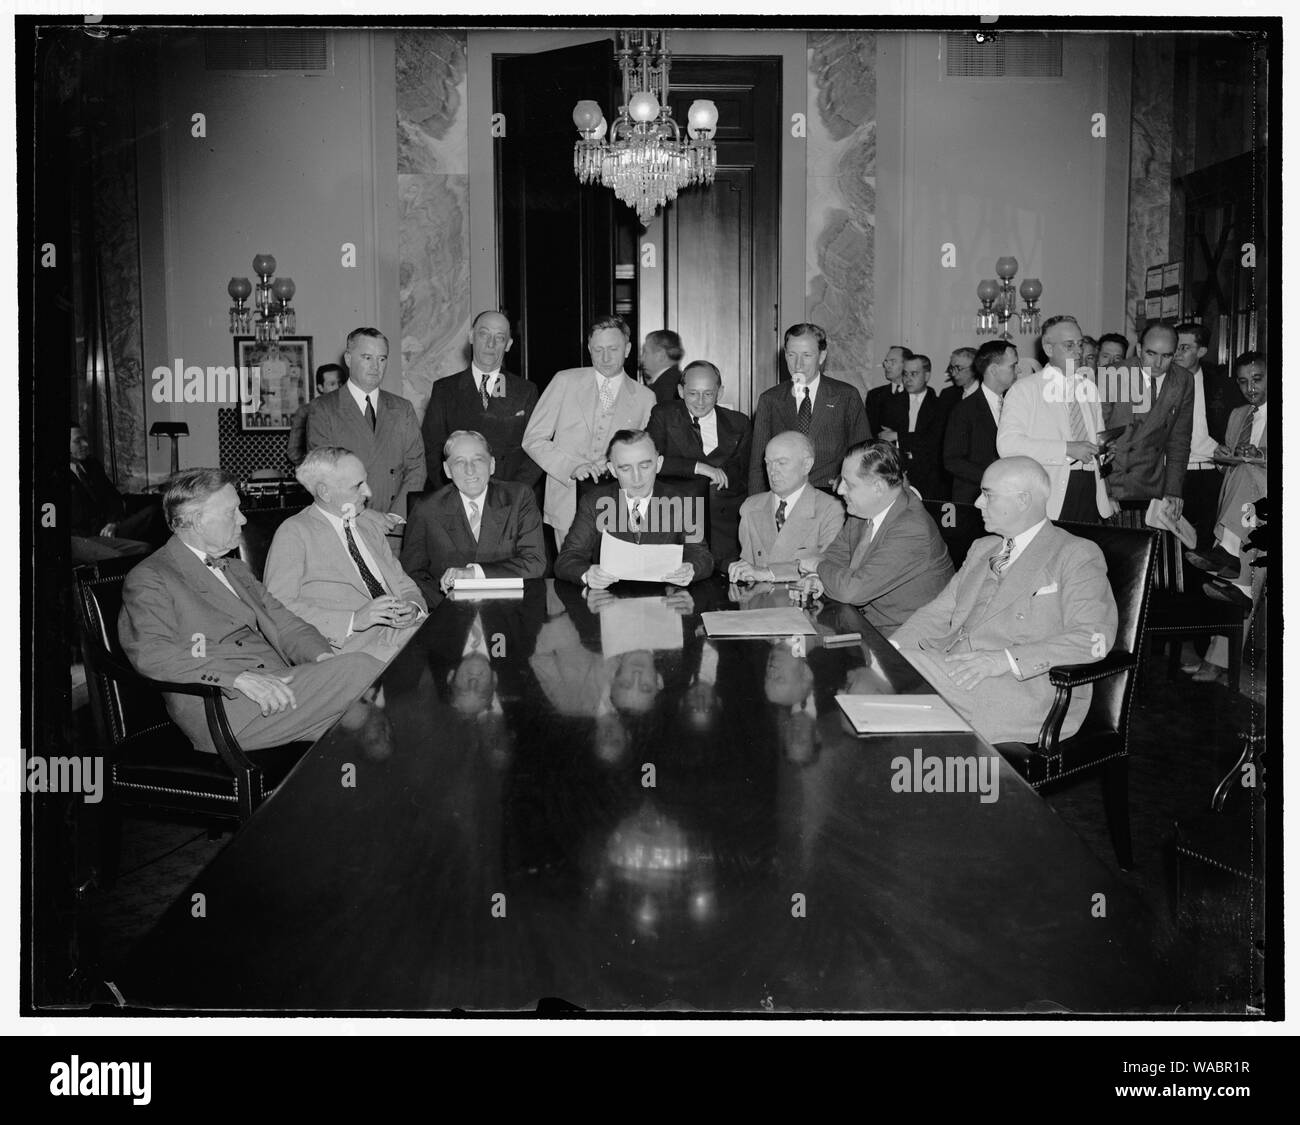 Congressional monopoly committee holds initial meeting. Washington, D.C., July 1. The Congressional Executive Committee to investigate monopolies held their first meeting today and charted a course designed to determine the efffect of concentrated wealth and power on business. Pictured, left to right: (sitting) Senator William E. Borah, Herman Oliphant, General Counsel for Treasury; Senator William H. King, Utah; Senator Hoseph C. O'Mahoney, of Wyoming and Chairman of the Committee; Rep. Hatton W. Sumners, of Texas and Vice Chairman; Thurman Arnold, Assistant Attorney General; and Rep. Edward Stock Photo